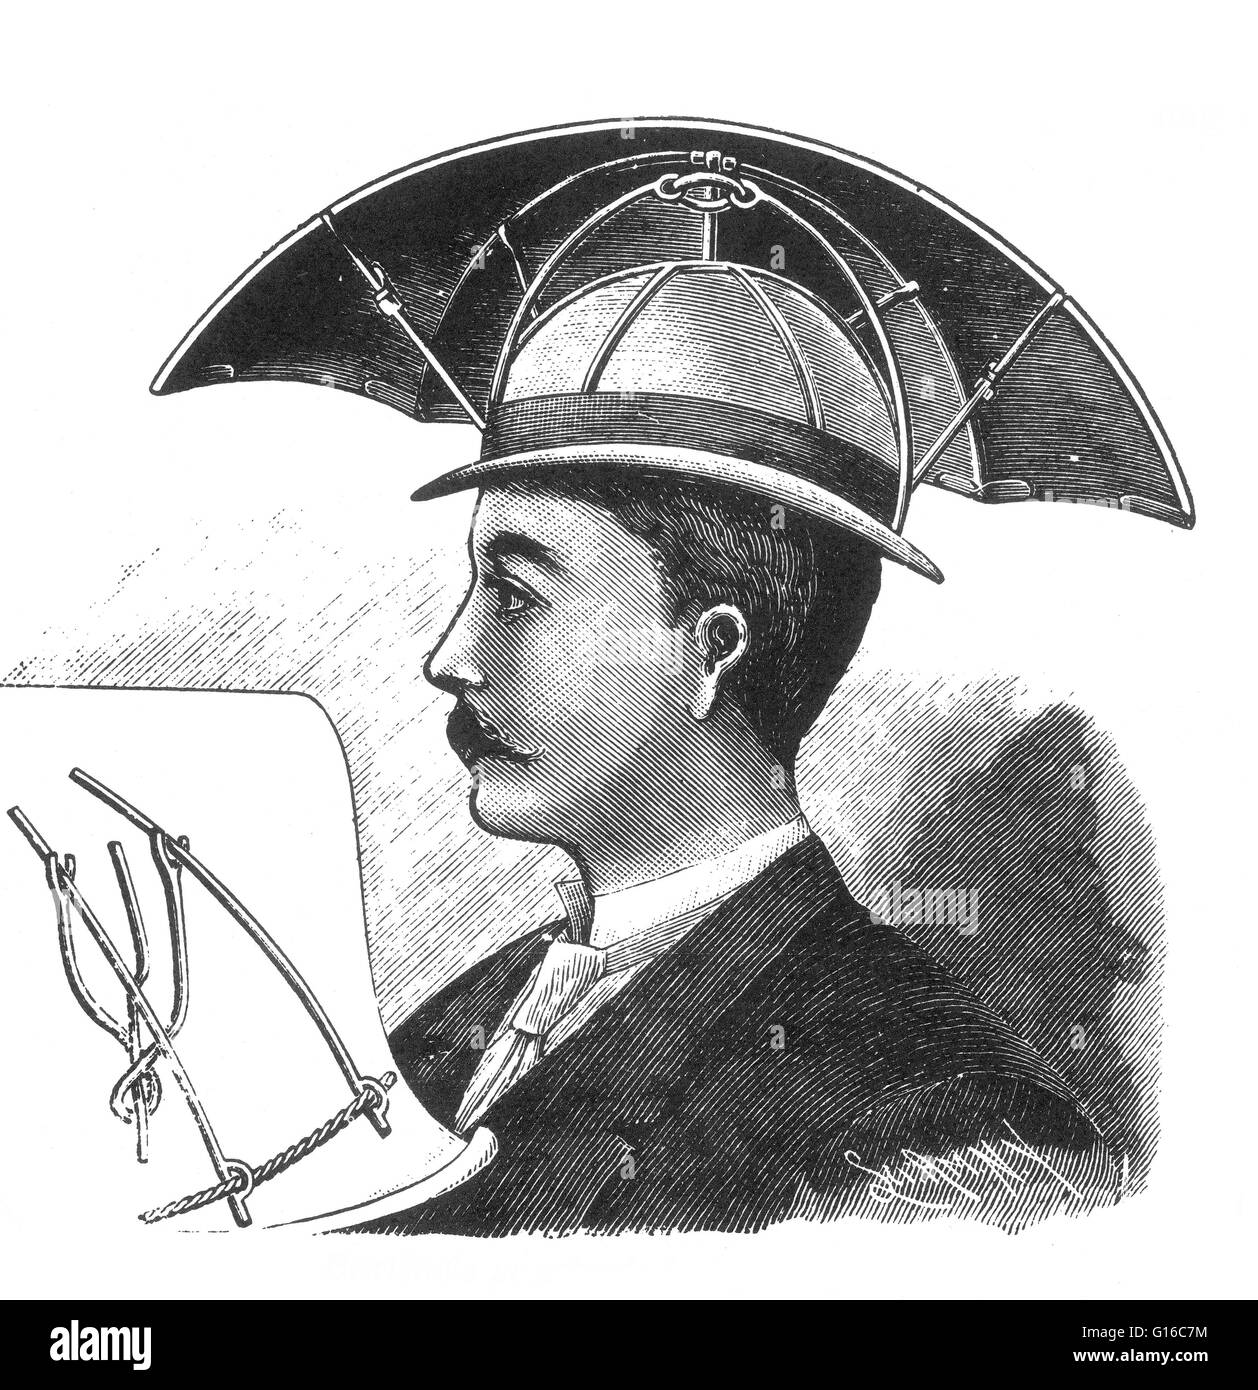 A simple umbrella designed to be worn over a hat and provide shade from the sun. An umbrella is a light, small, portable, usually circular cover for protection from rain or sun, consisting of a fabric held on a collapsible frame of thin ribs radiating fro Stock Photo